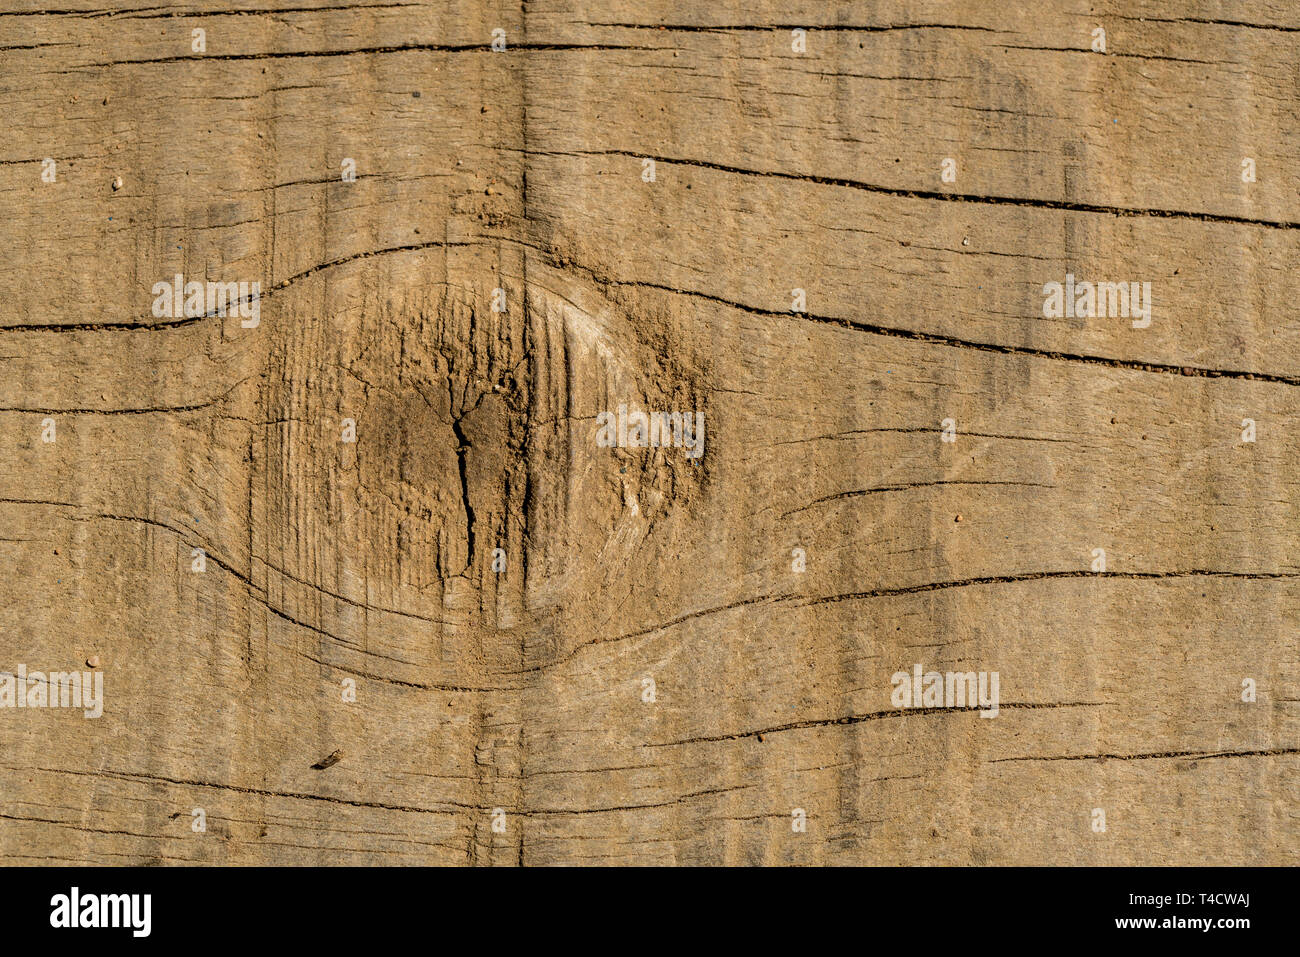 A macro / close up photo of the texture and a knot on a wooden surface. Stock Photo